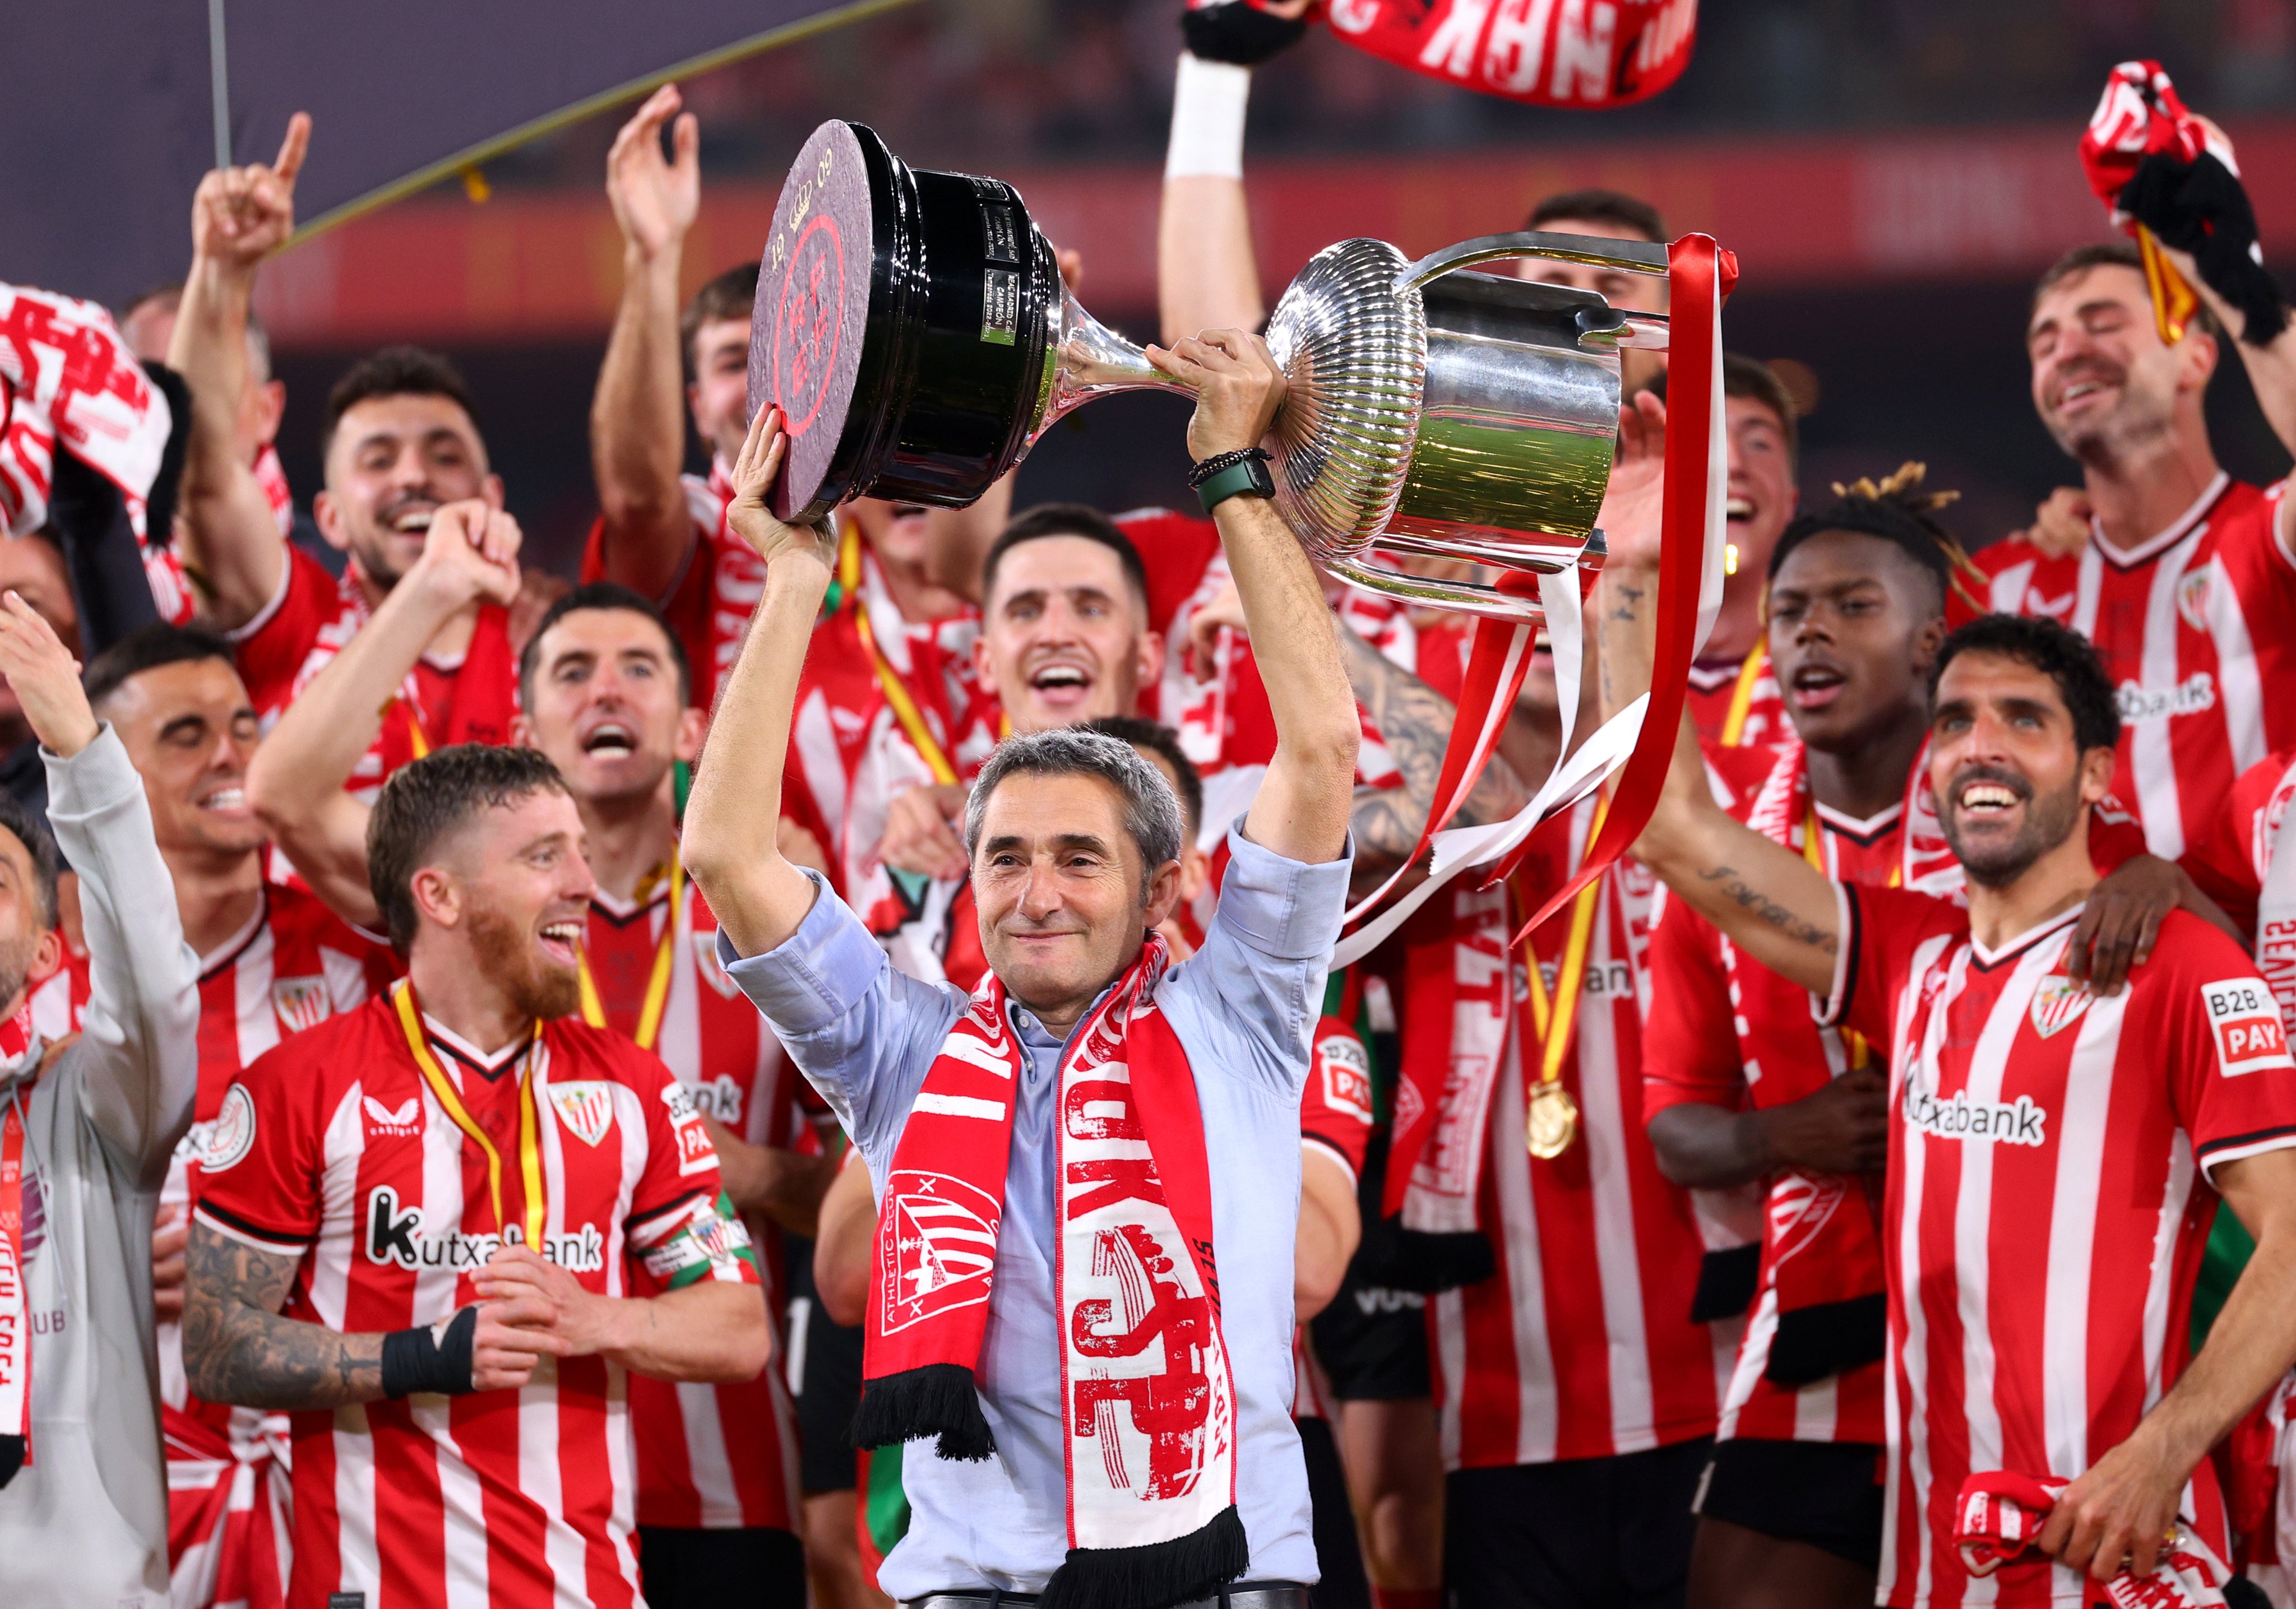 Ernesto Valverde expected to sign new contract after guiding Athletic Club to Copa del Rey glory